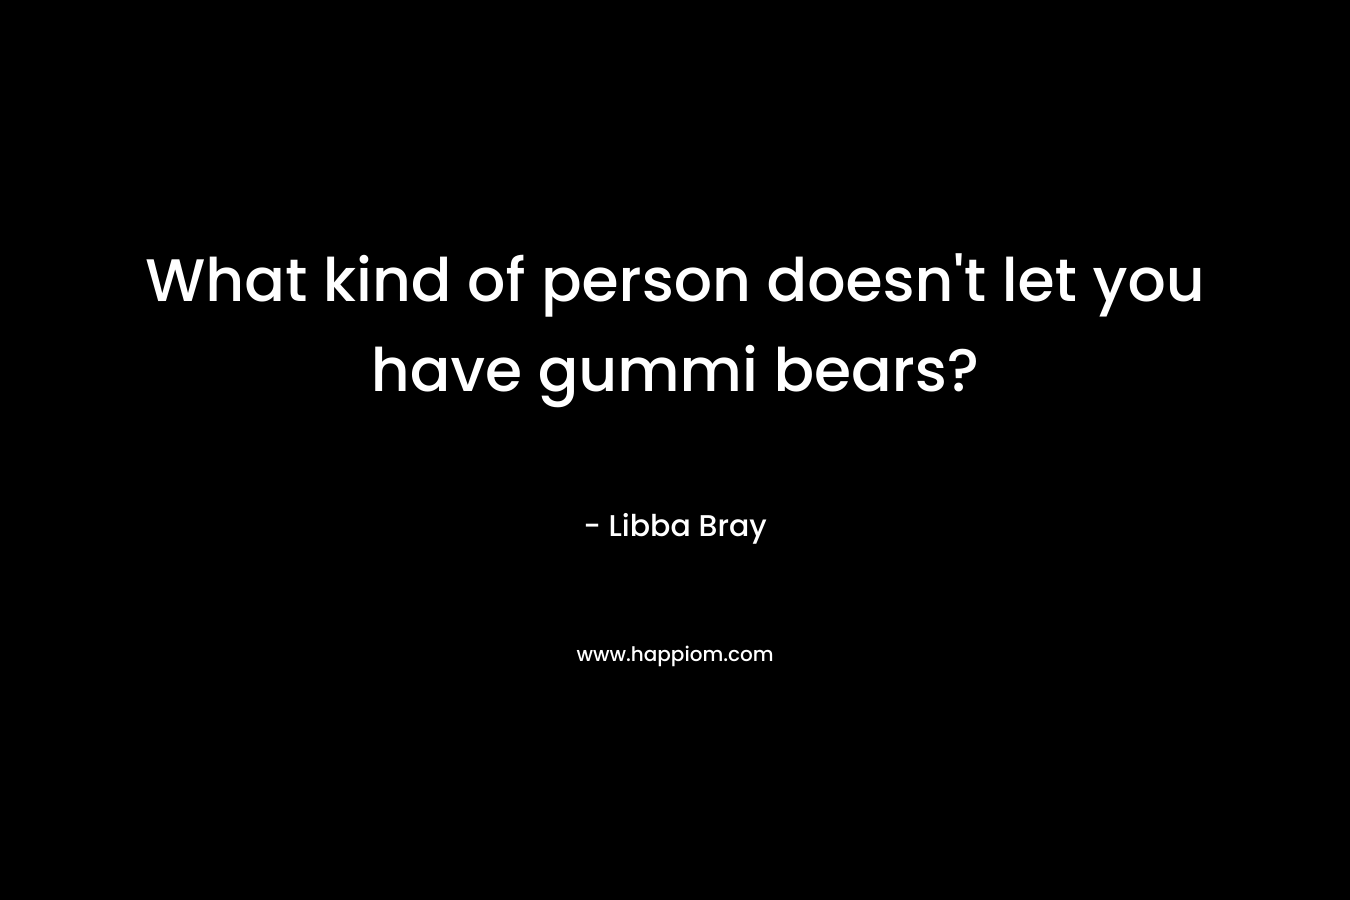 What kind of person doesn’t let you have gummi bears? – Libba Bray